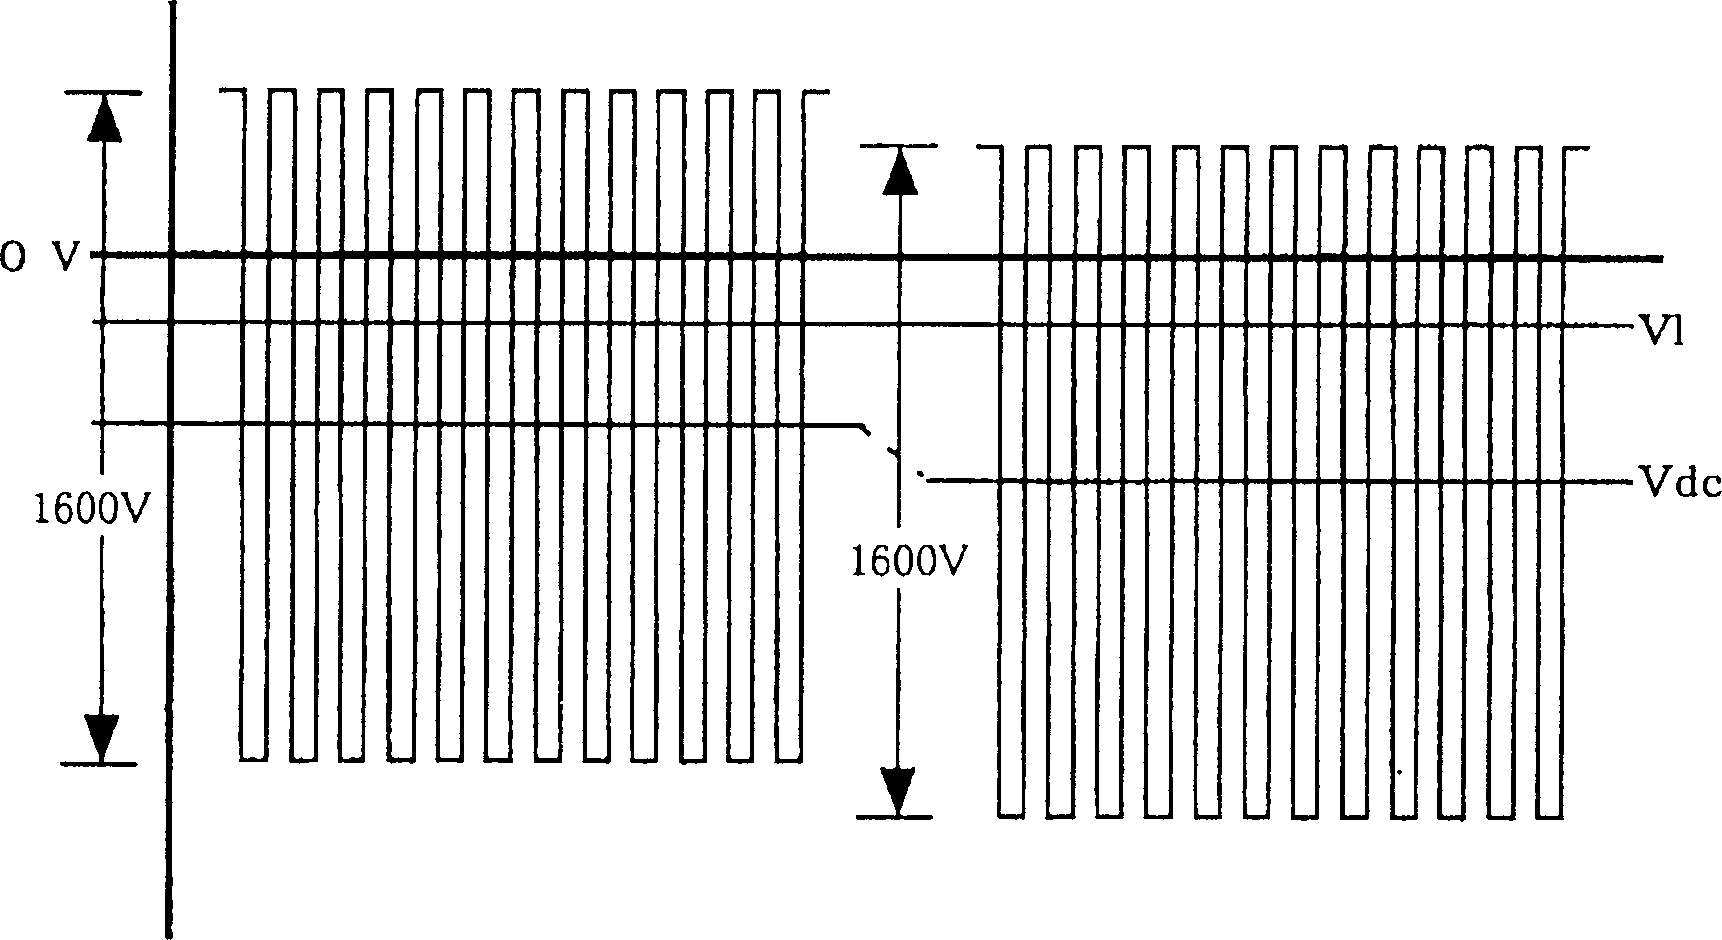 Image forming unit and displaying unit